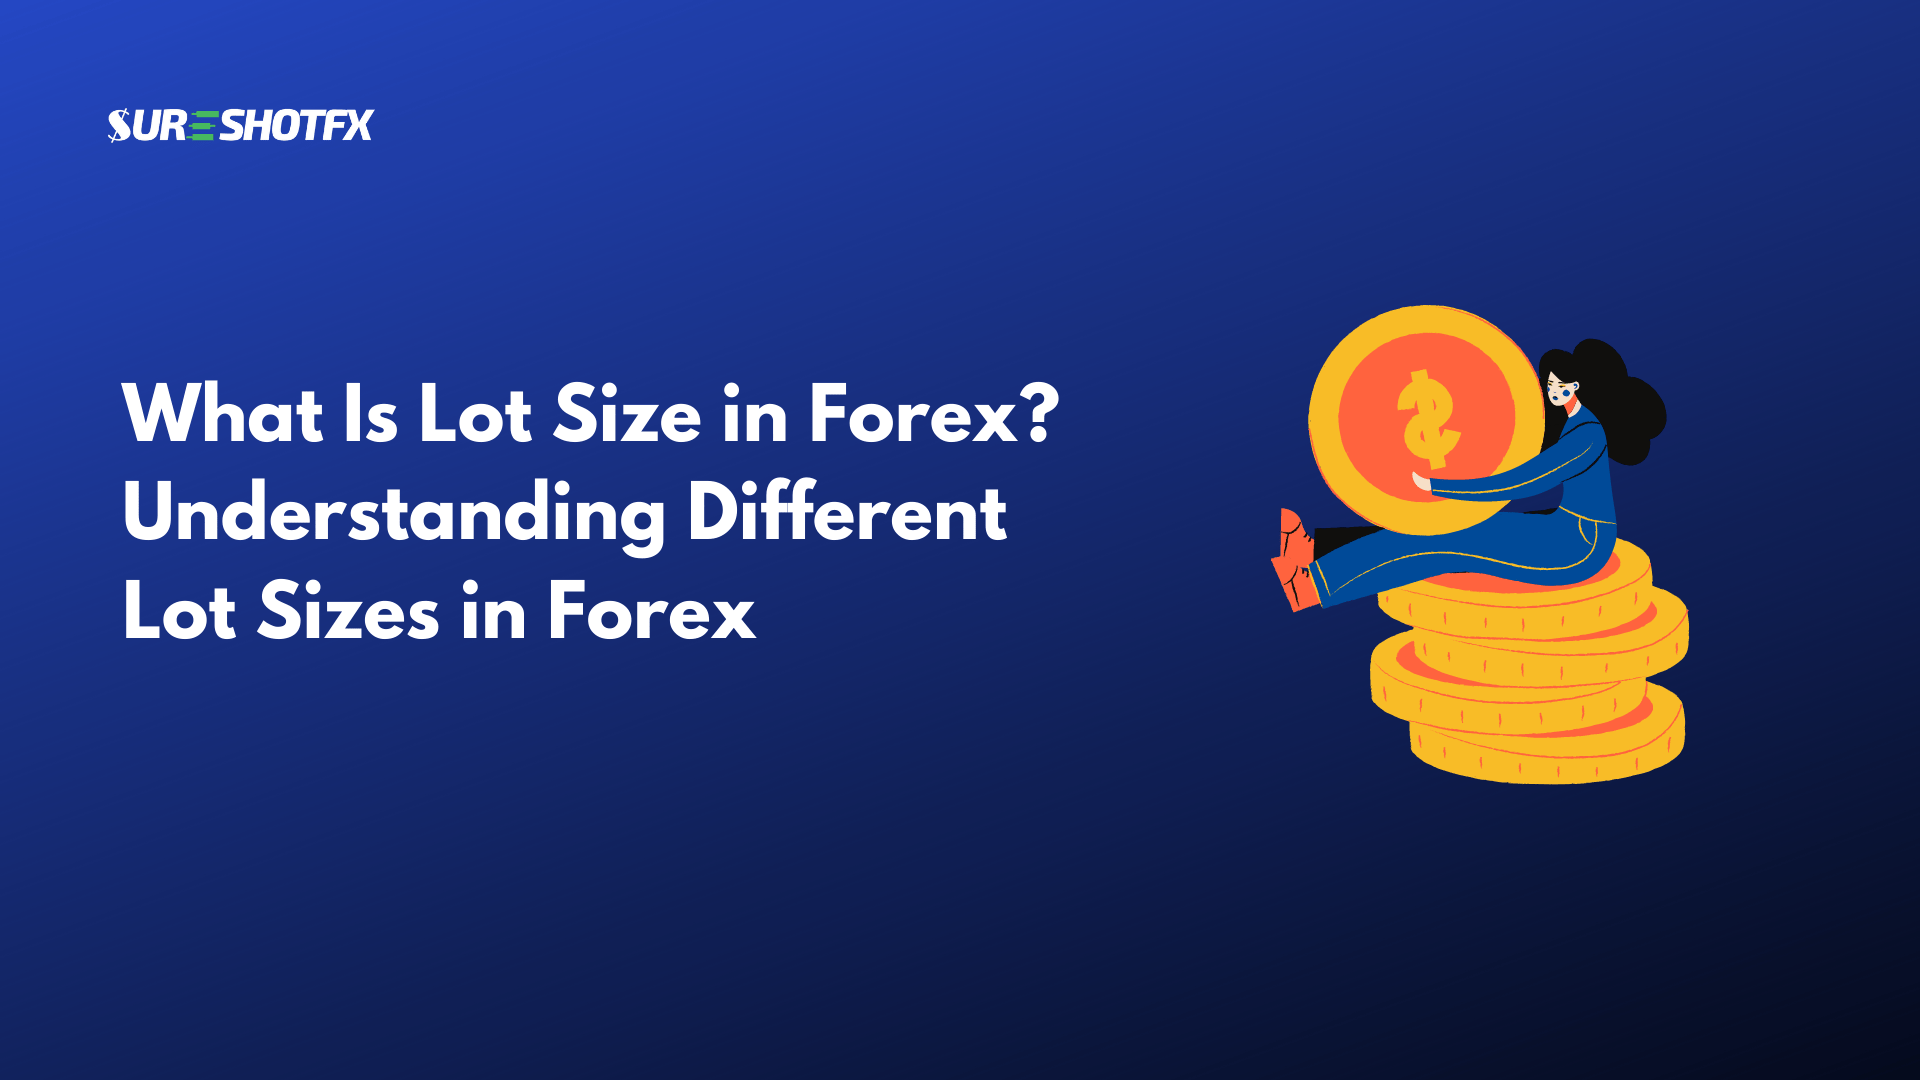 What Is Lot Size in Forex